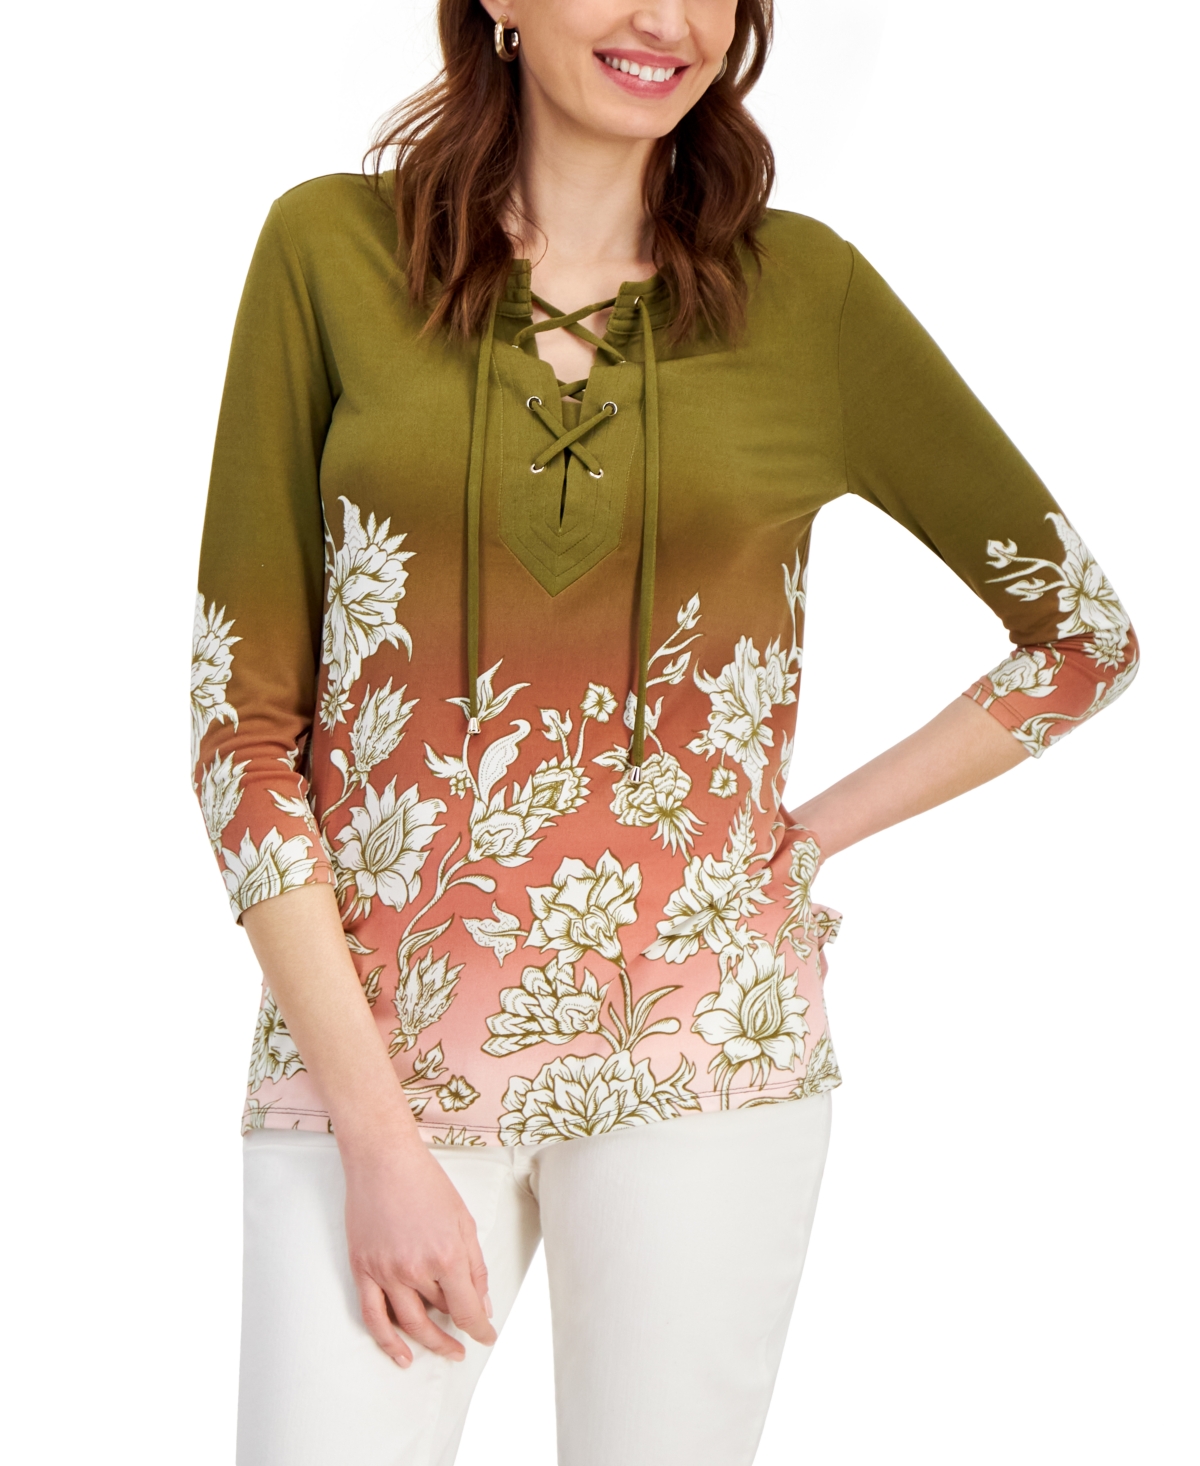 Petite Garden Lace-Up 3/4-Sleeve Tunic Top, Created for Macy's - New Avocado Combo